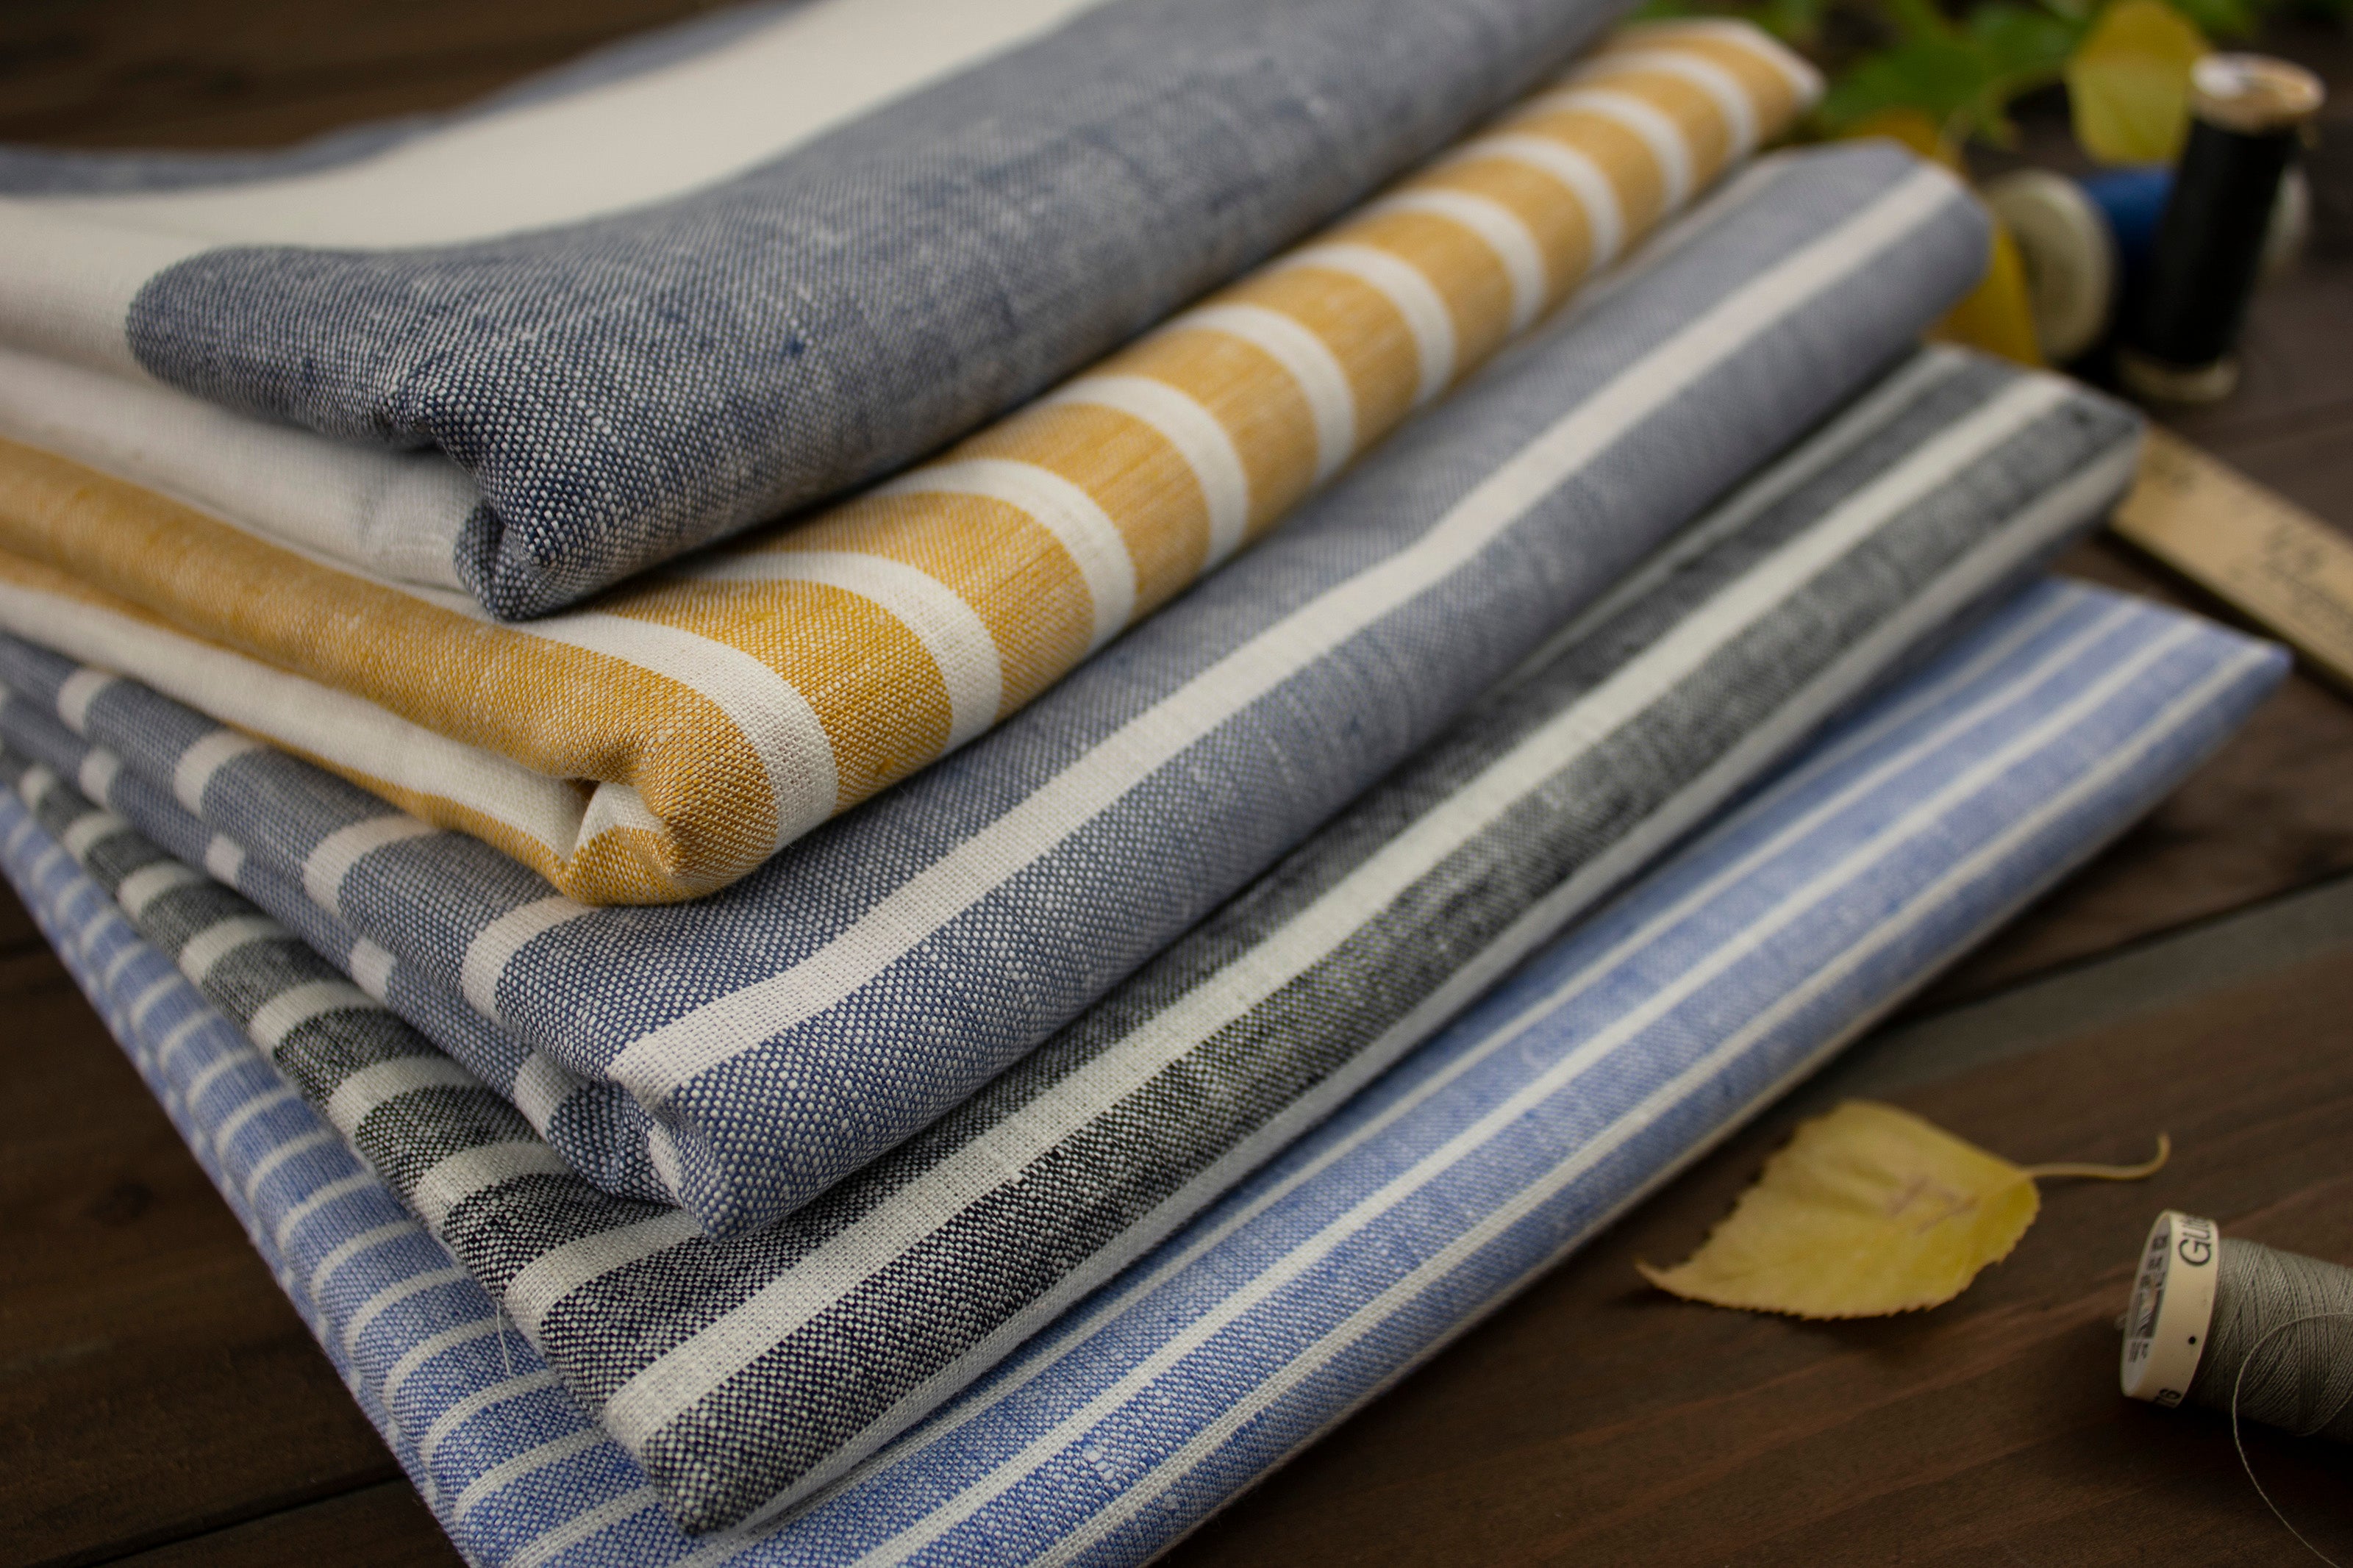 Striped Linen Fabric by the Yard / 100% Linen Fabric / Linen Material Online